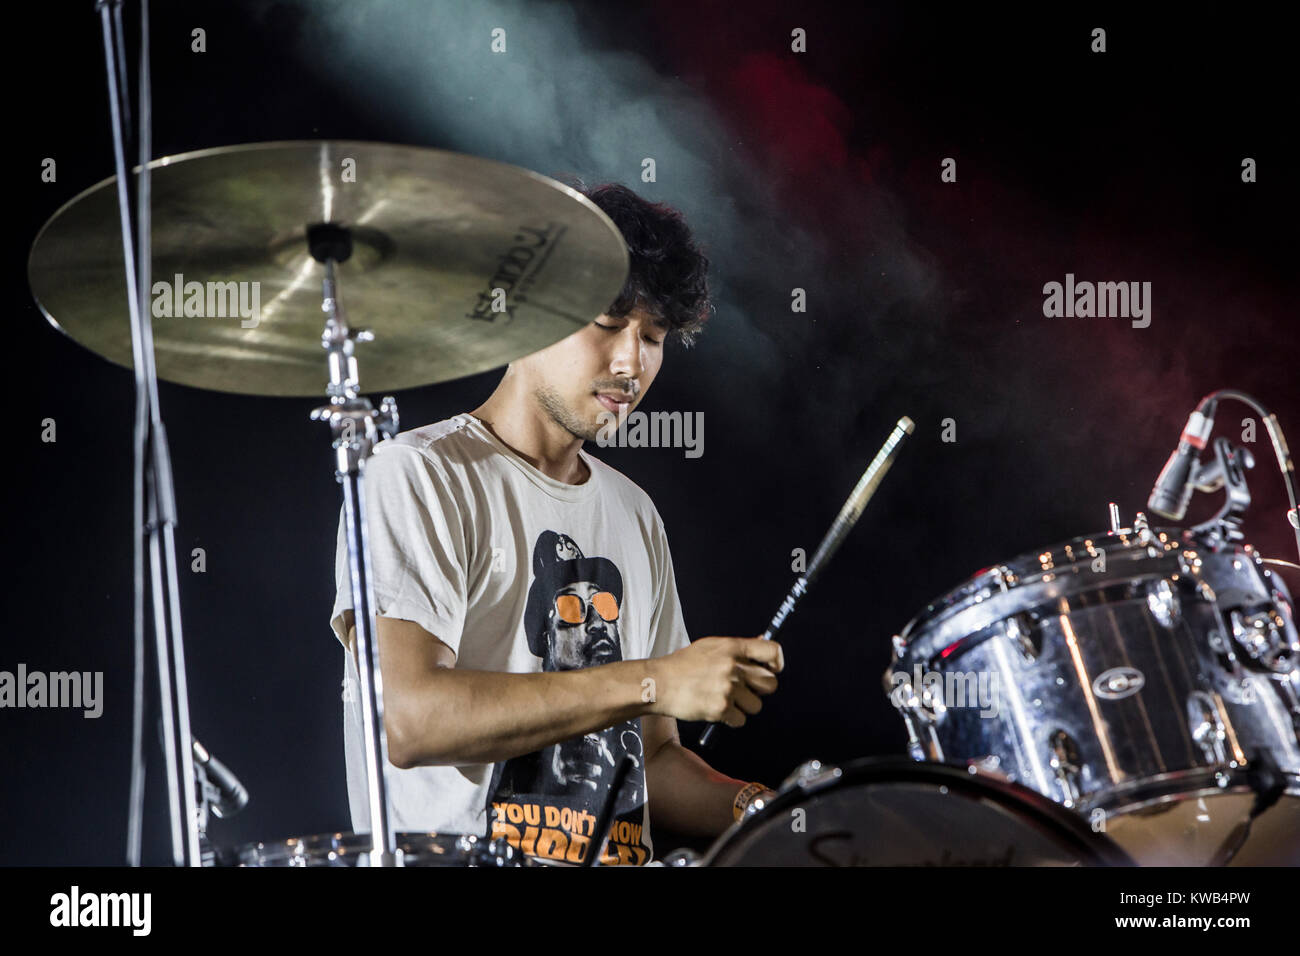 The American indie rock band Deerhunter performs a live concert at the Arena Stage at Roskilde Festival 2014. Here drummer and musician Moses Archuleta is pictured live on stage. Denmark 06.07.2014. Stock Photo